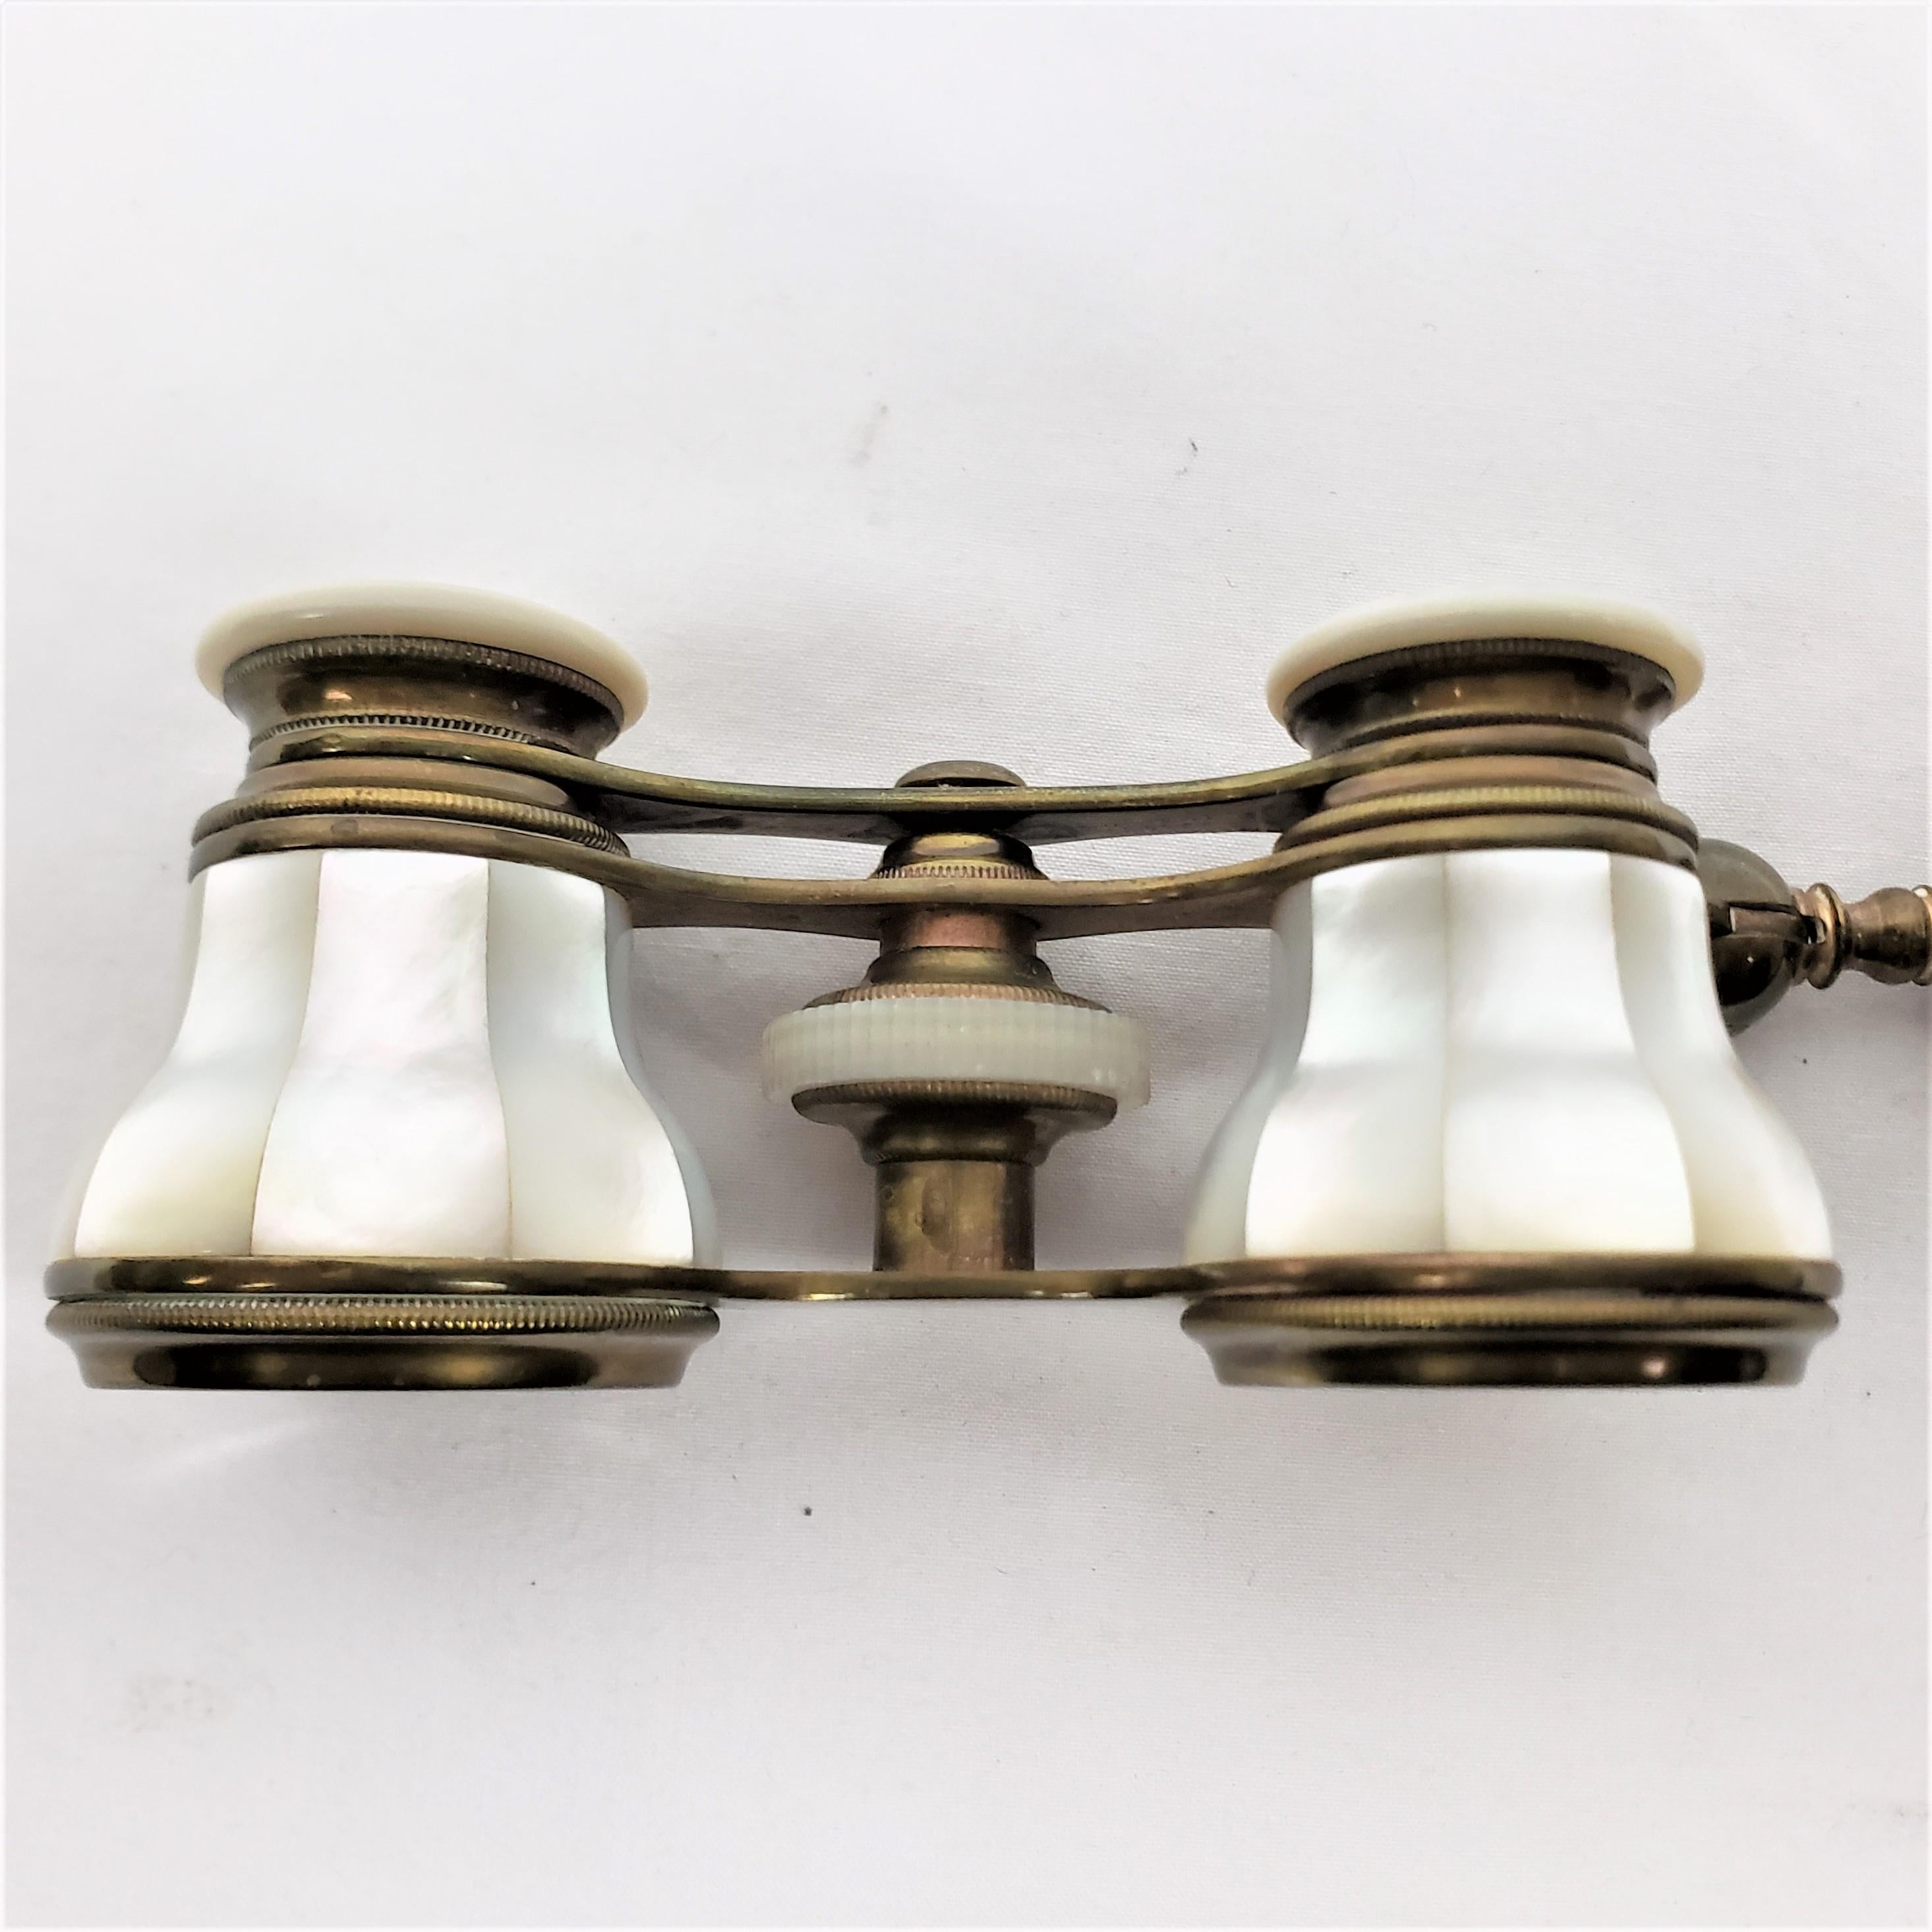 Antique French Lorgnette Binoculars or Opera Glasses in Brass & Mother of Pearl For Sale 8